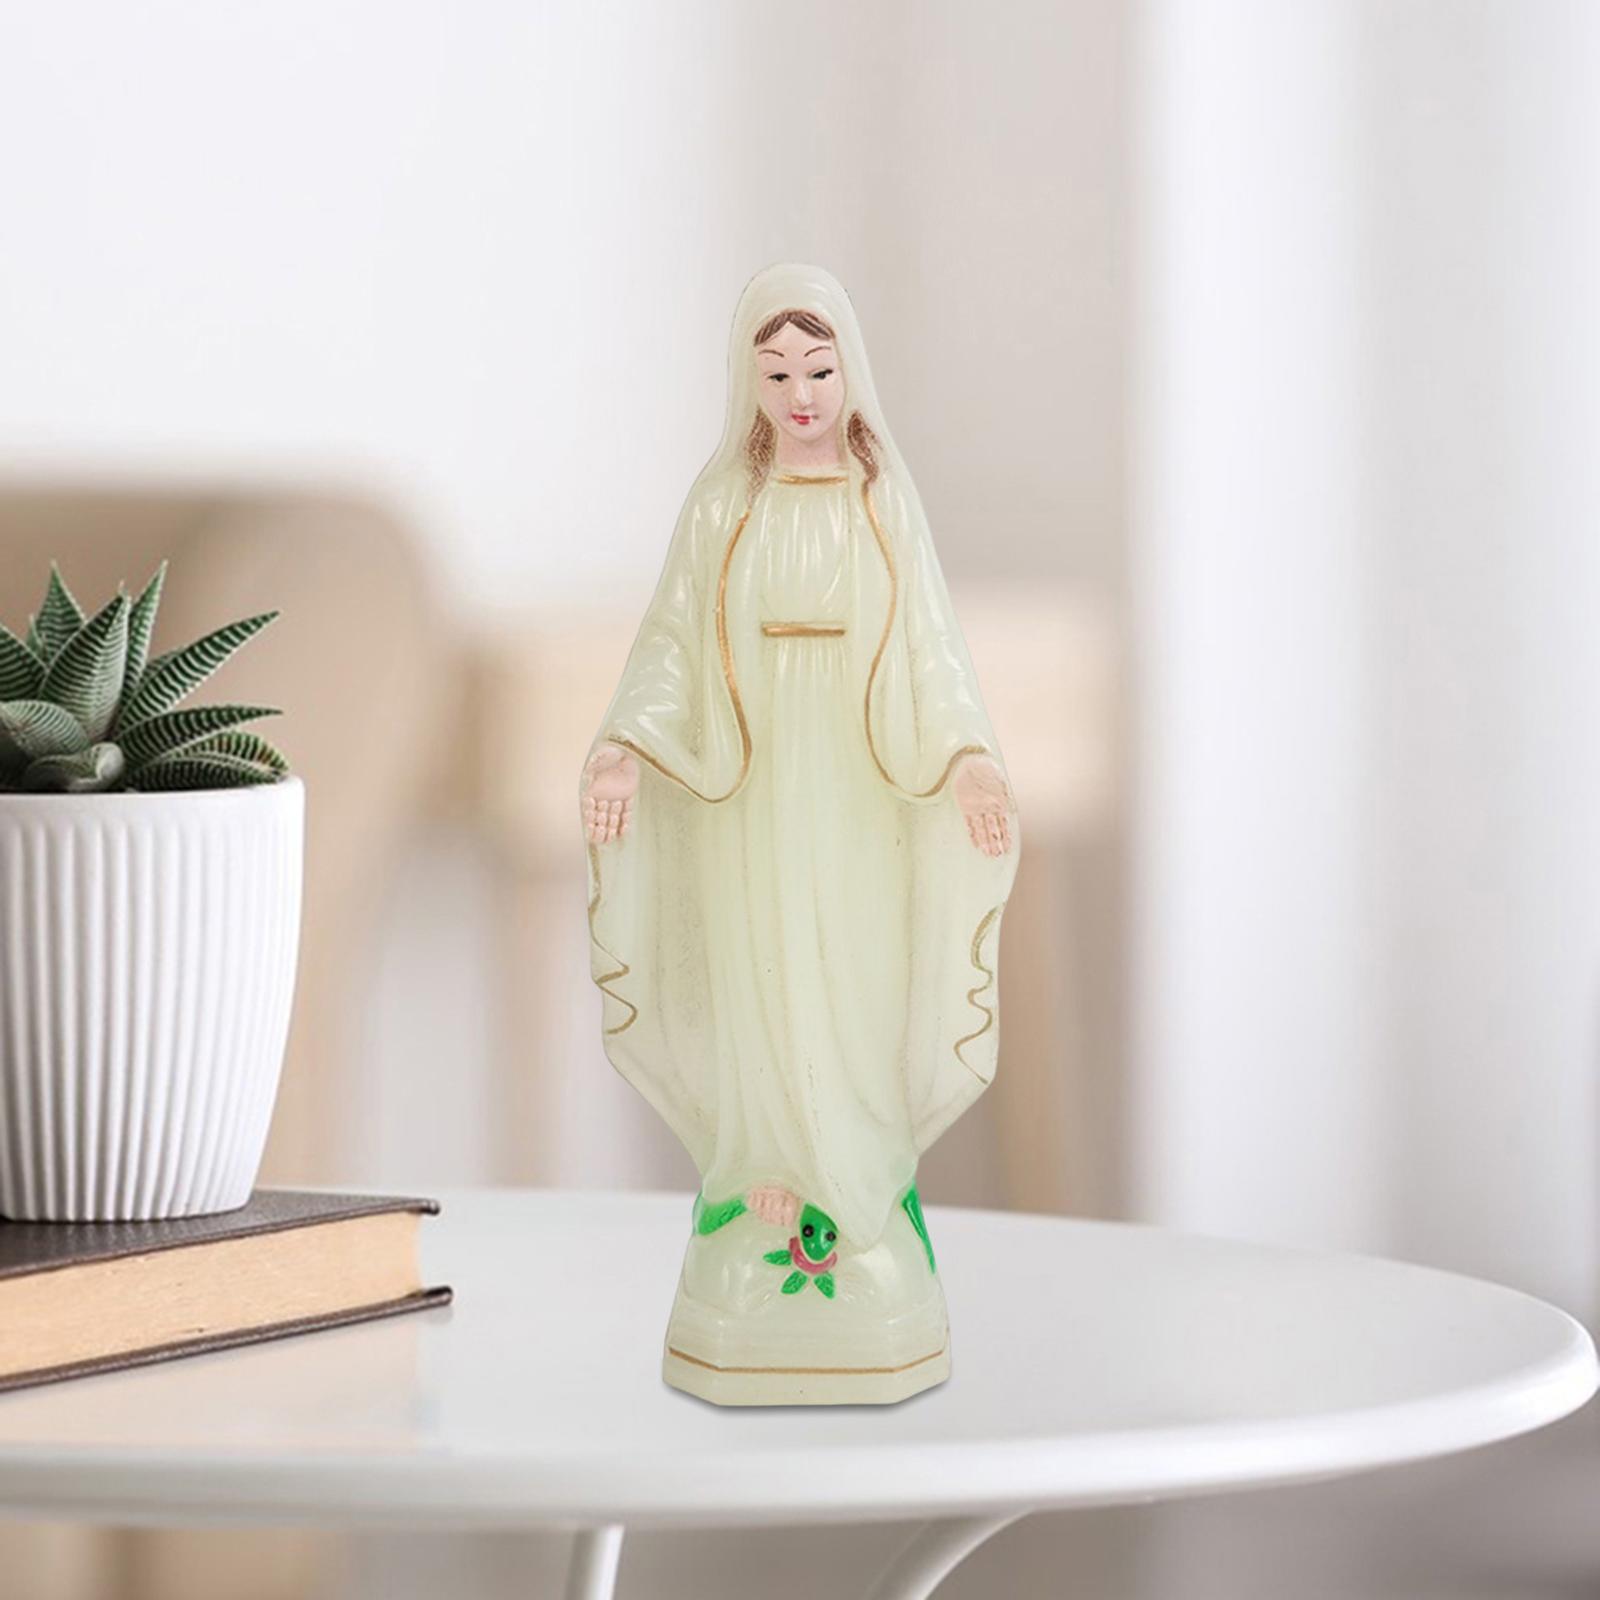 Blessed Virgin Mary Figurine Character Sculpture Statue Decoration 15cm Luminous